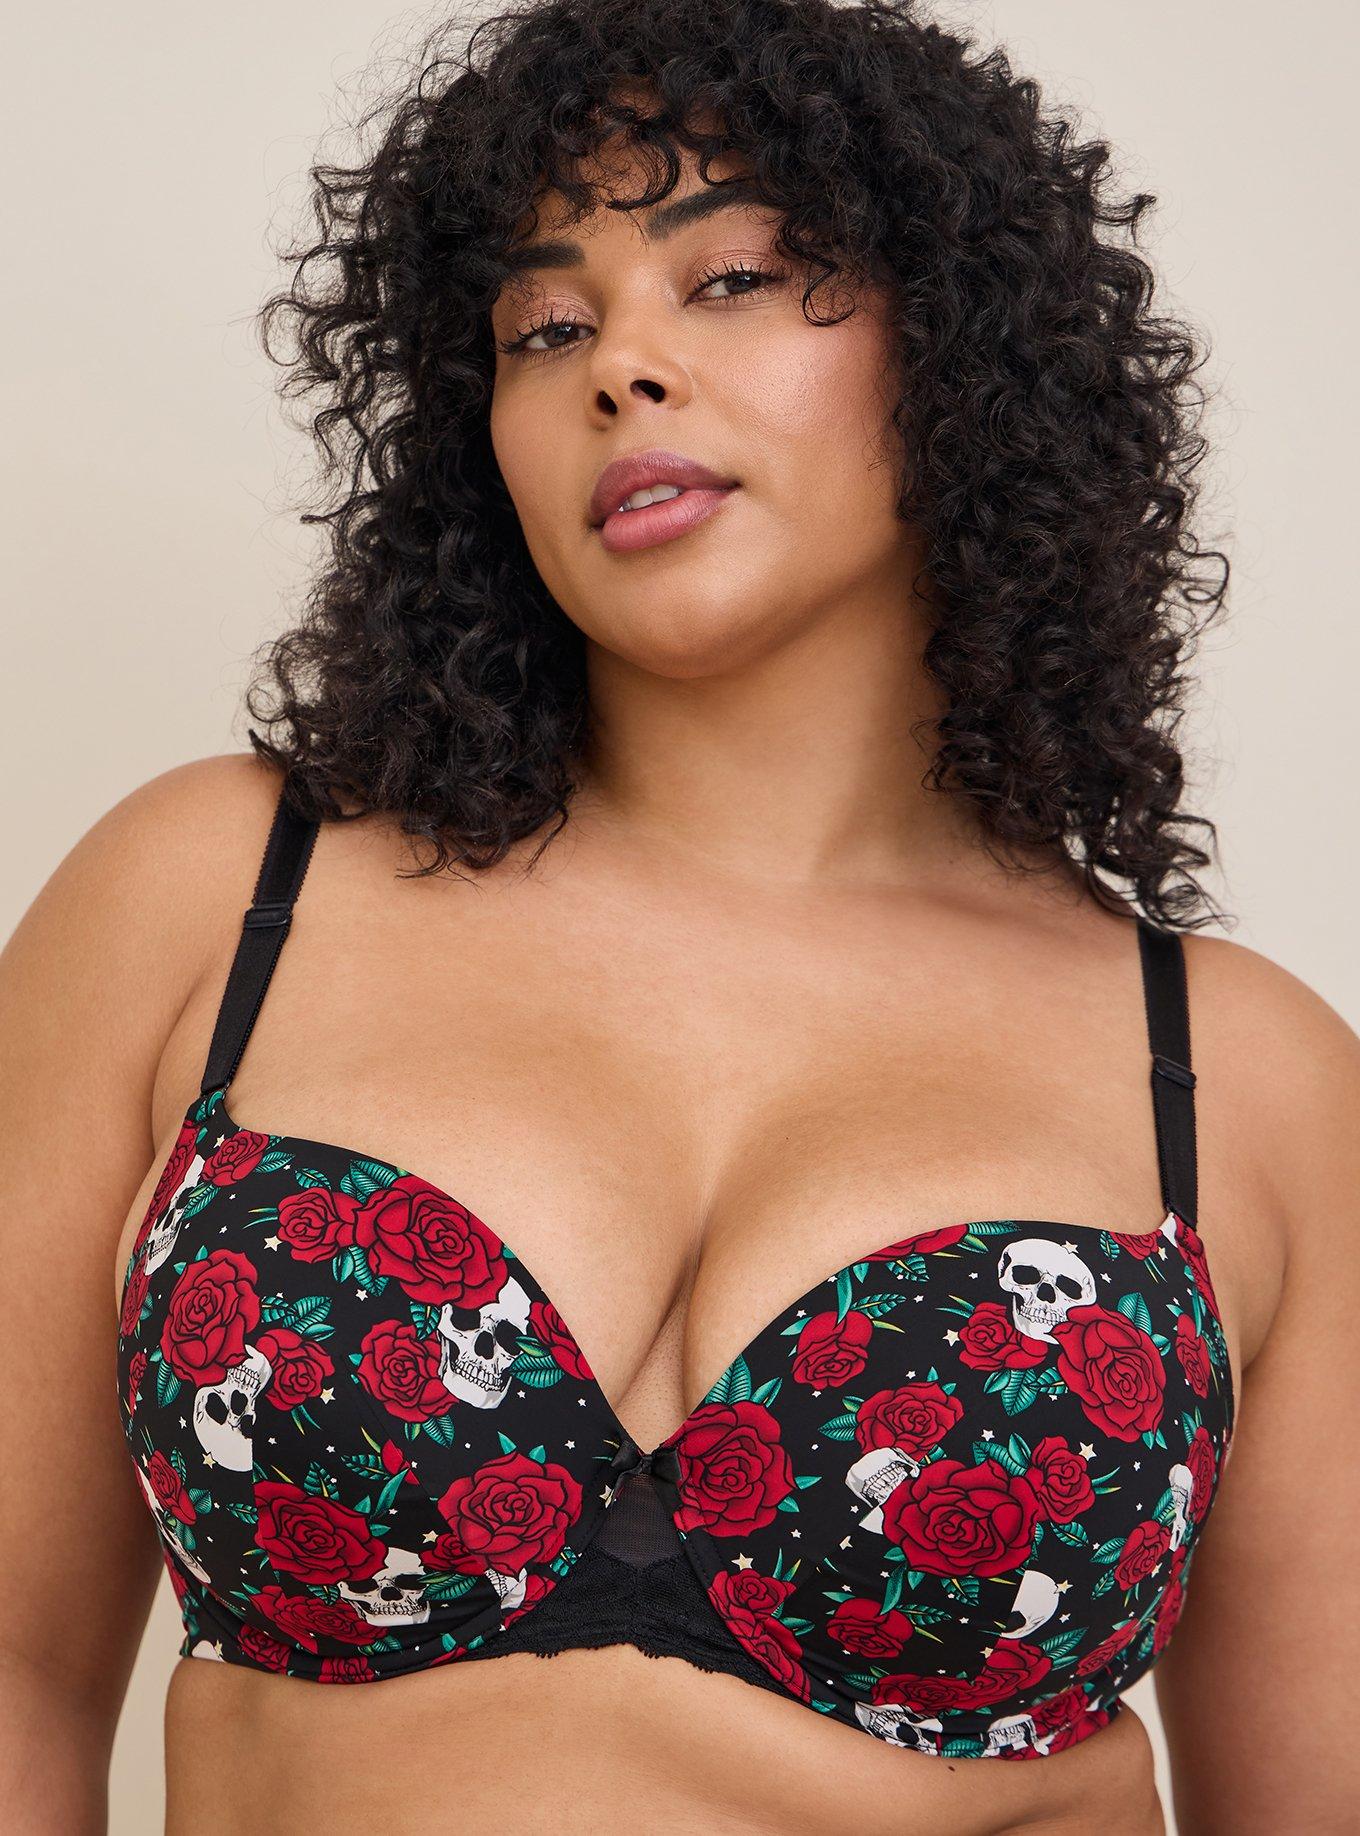 Torrid Curve Size 44DDD Underwire Push Up Sexy Bra in Blue Shooting Stars